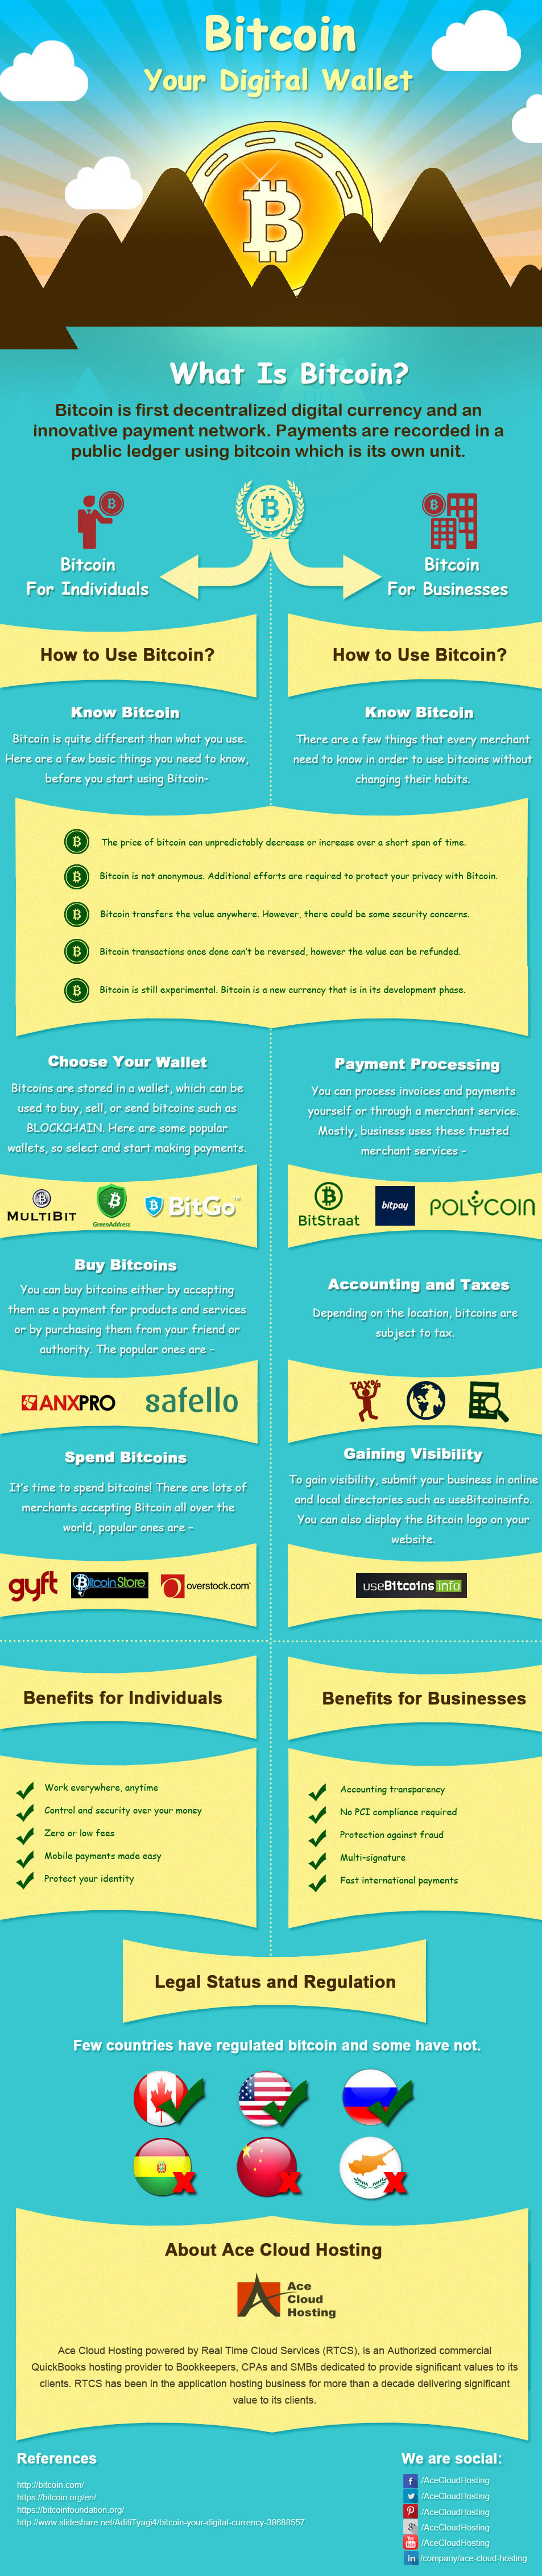 Getting Started With Bitcoin Your Digital Wallet Infographic